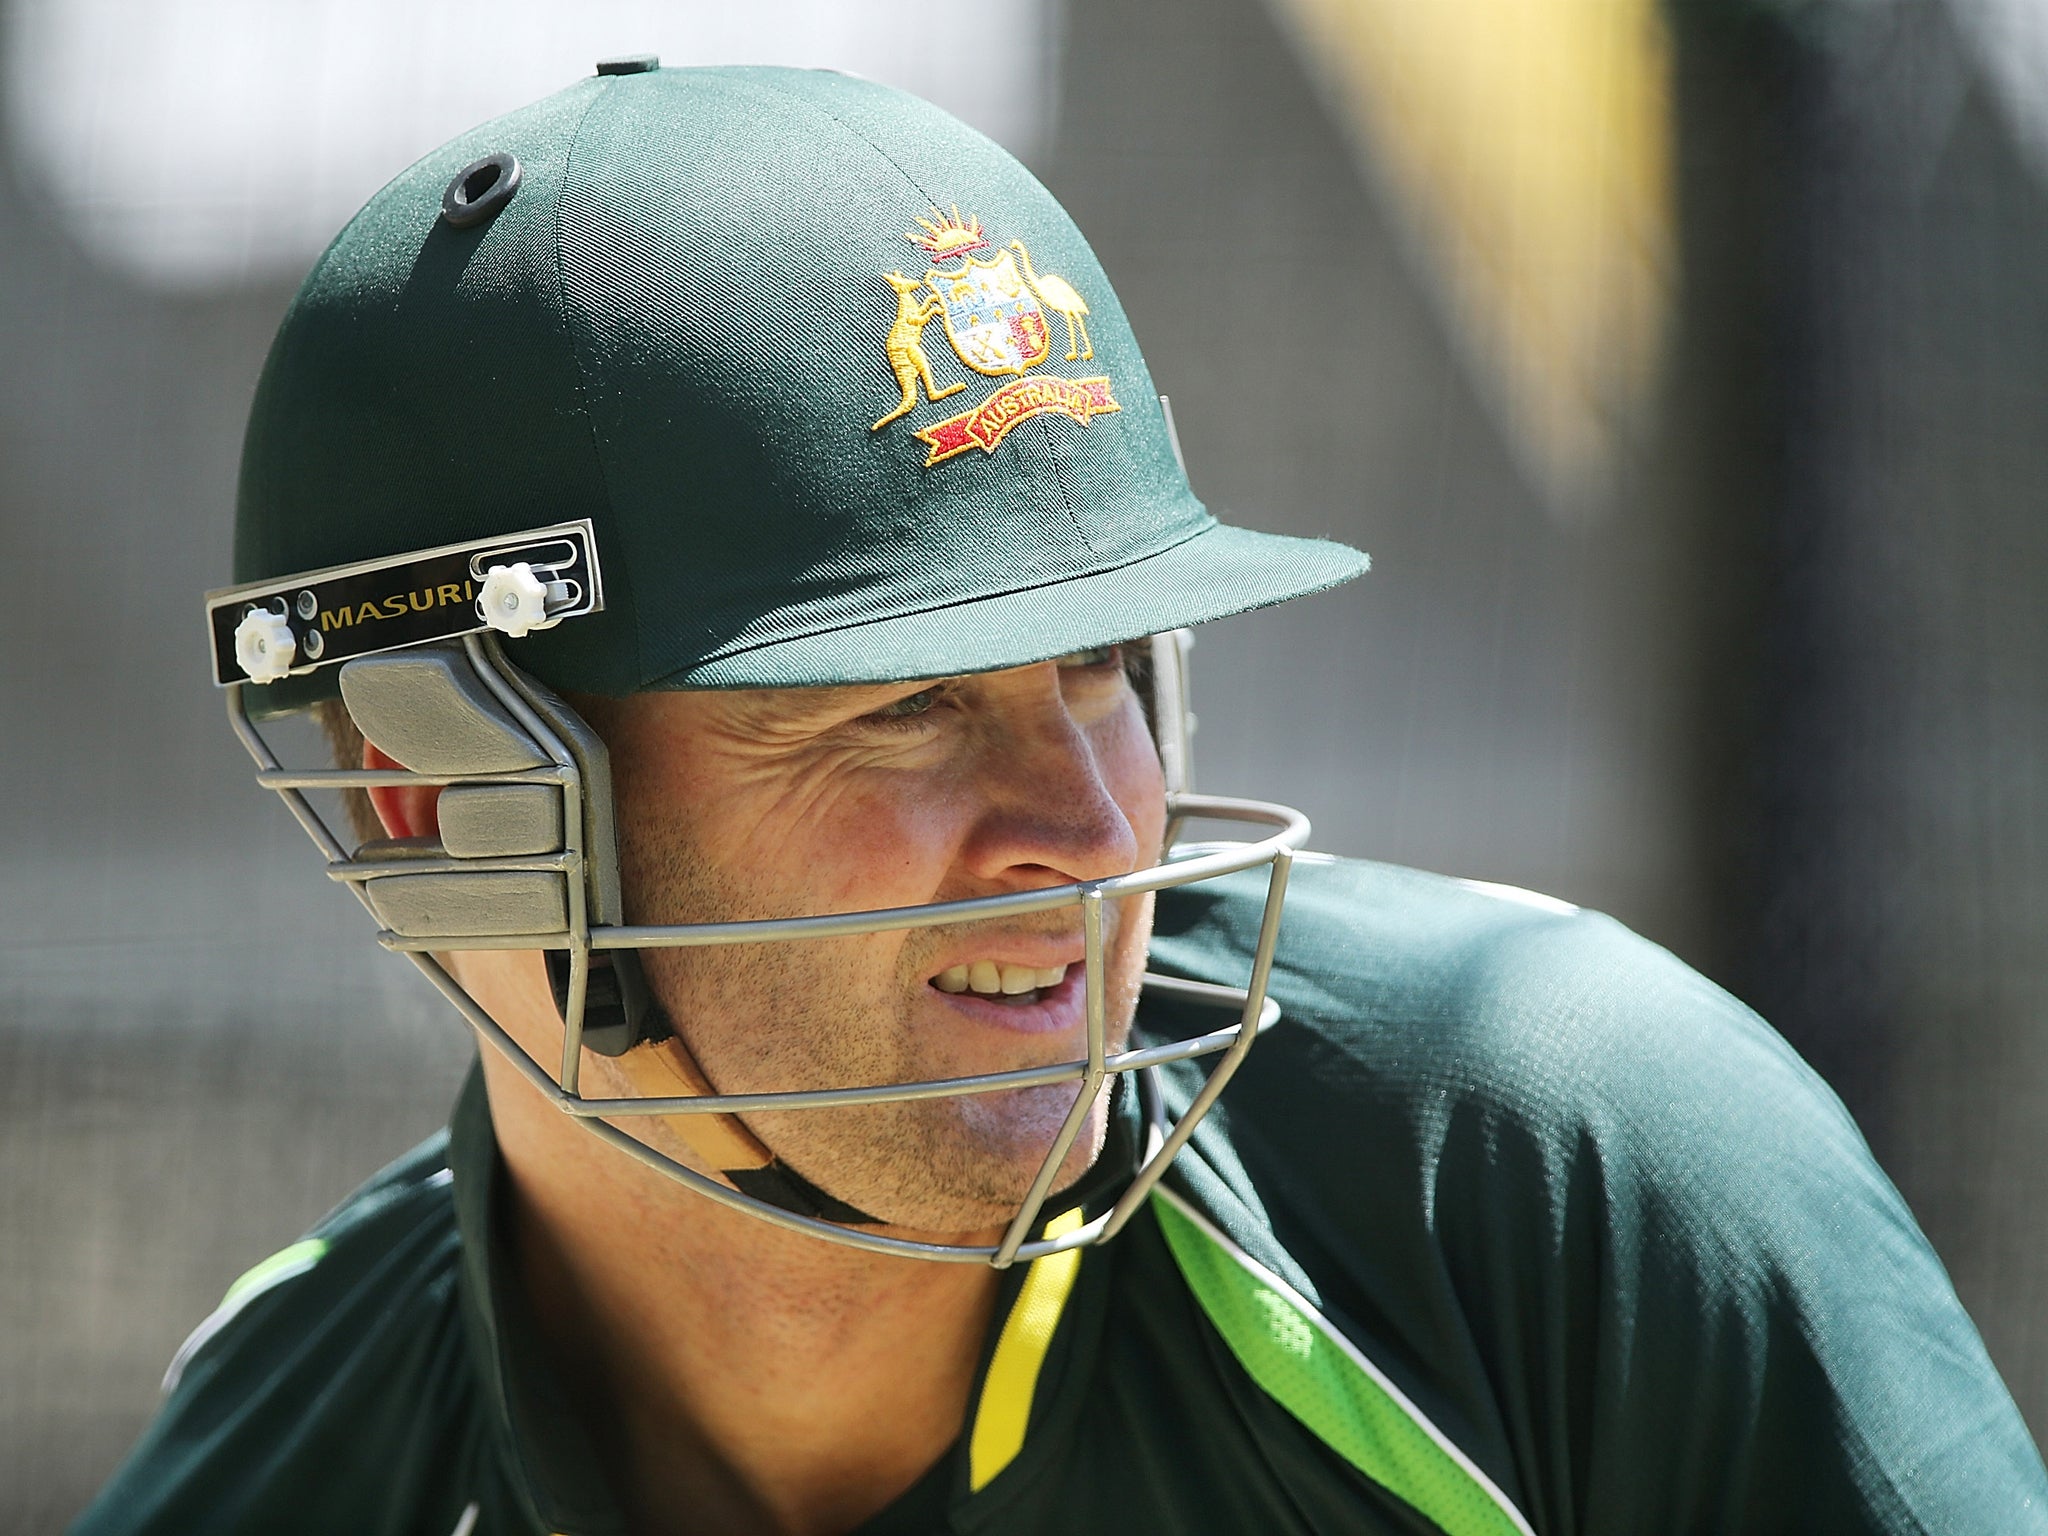 Australia captain Michael Clarke missed training due to a sore right ankle but is expected to be fit for the beginning of the second Ashes Test